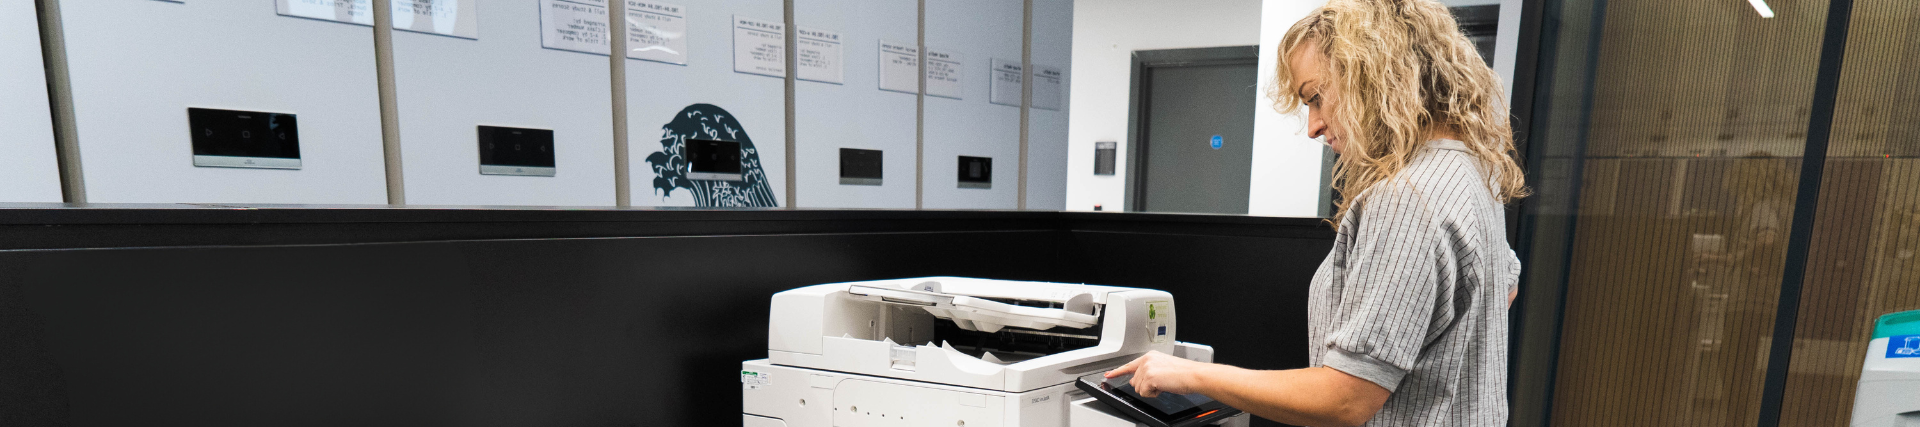 A female student using the printer and photocopier in the library.